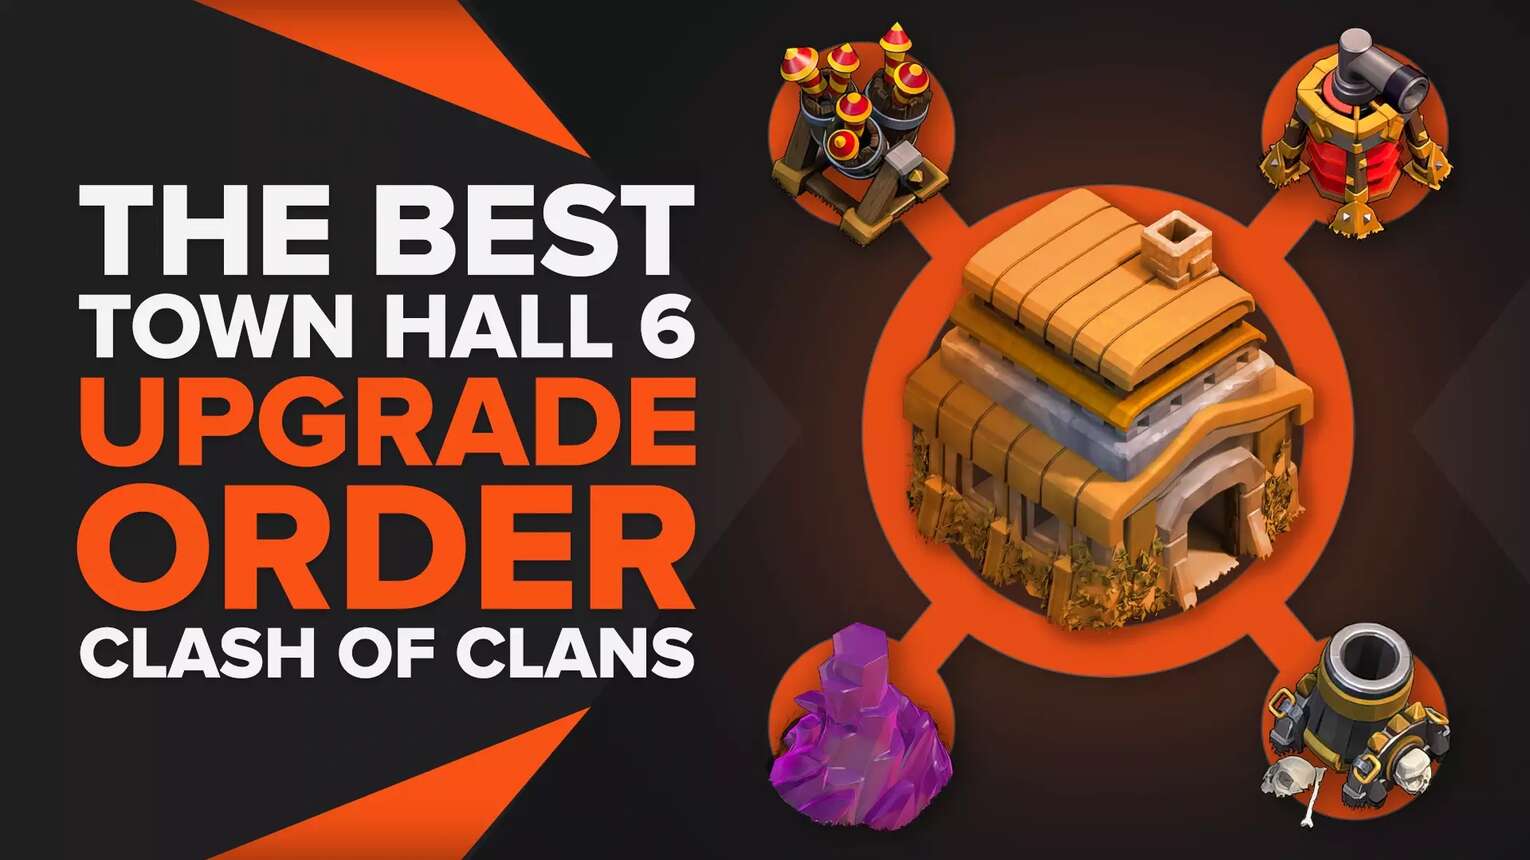 See The Best Upgrade Order for Town Hall 6 in Clash of Clans